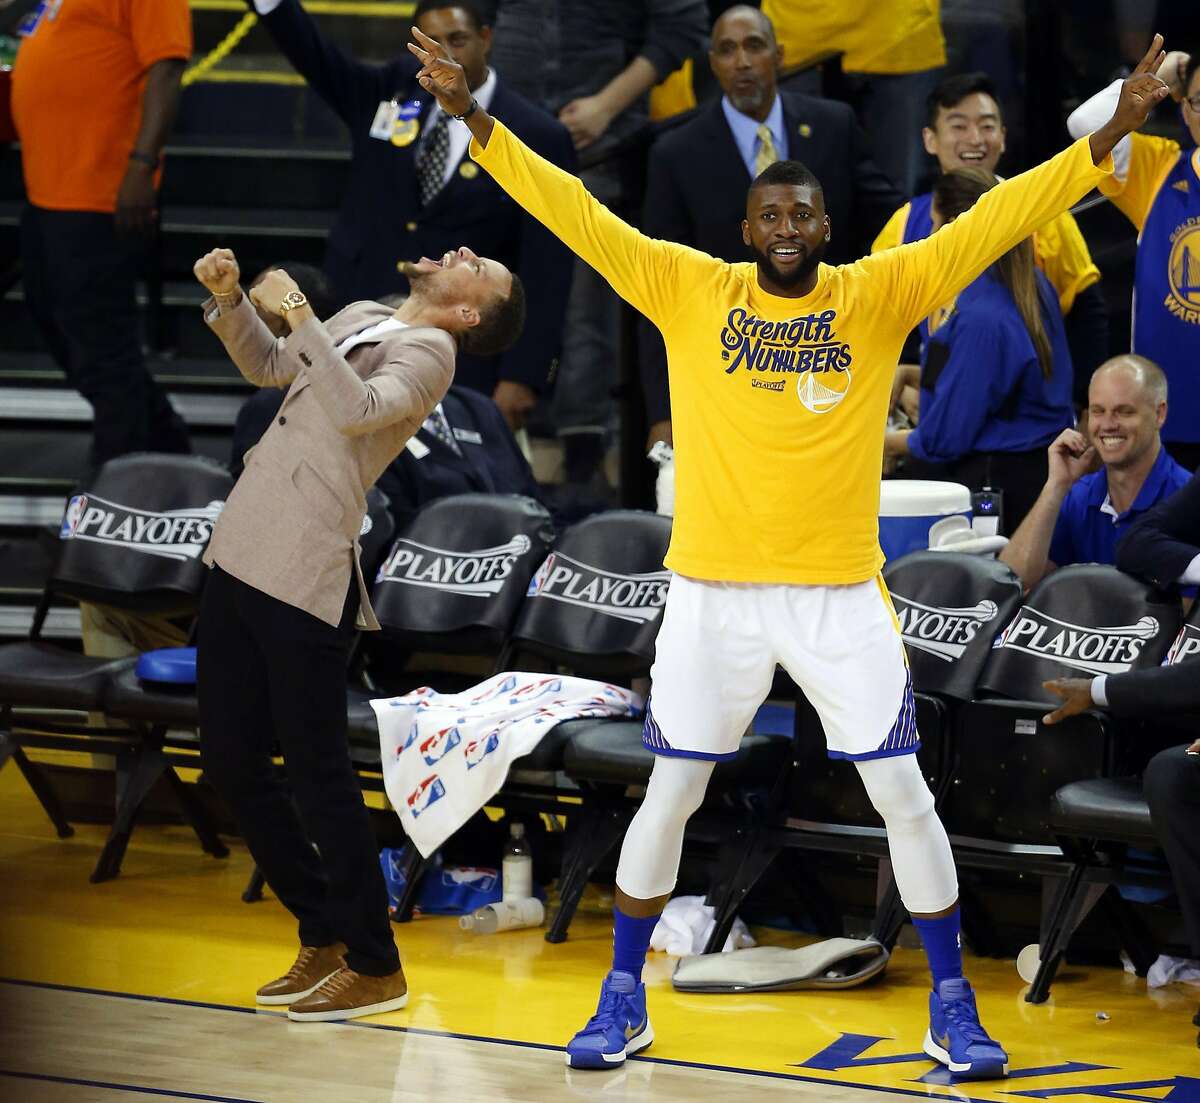 Golden State Warriors' Stephen Curry and Festus Ezeli enjoy a Klay Thompson 3-pointer in 3rd quarter against Houston Rockets in Game 5 of 1st Round of NBA Playoffs at Oracle Arena in Oakland, Calif., on Wednesday, April 27, 2016.